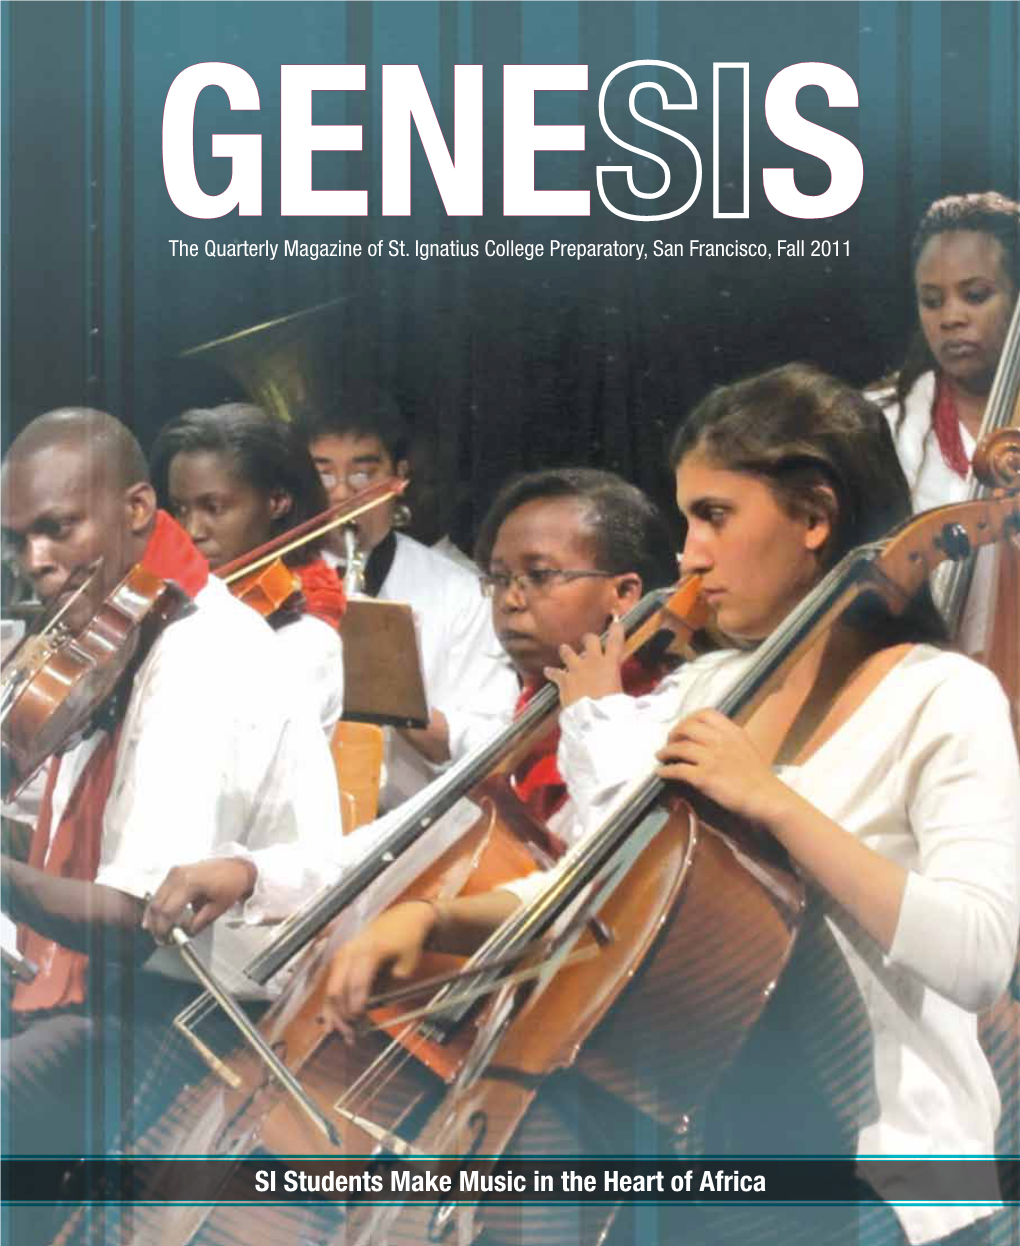 SI Students Make Music in the Heart of Africa